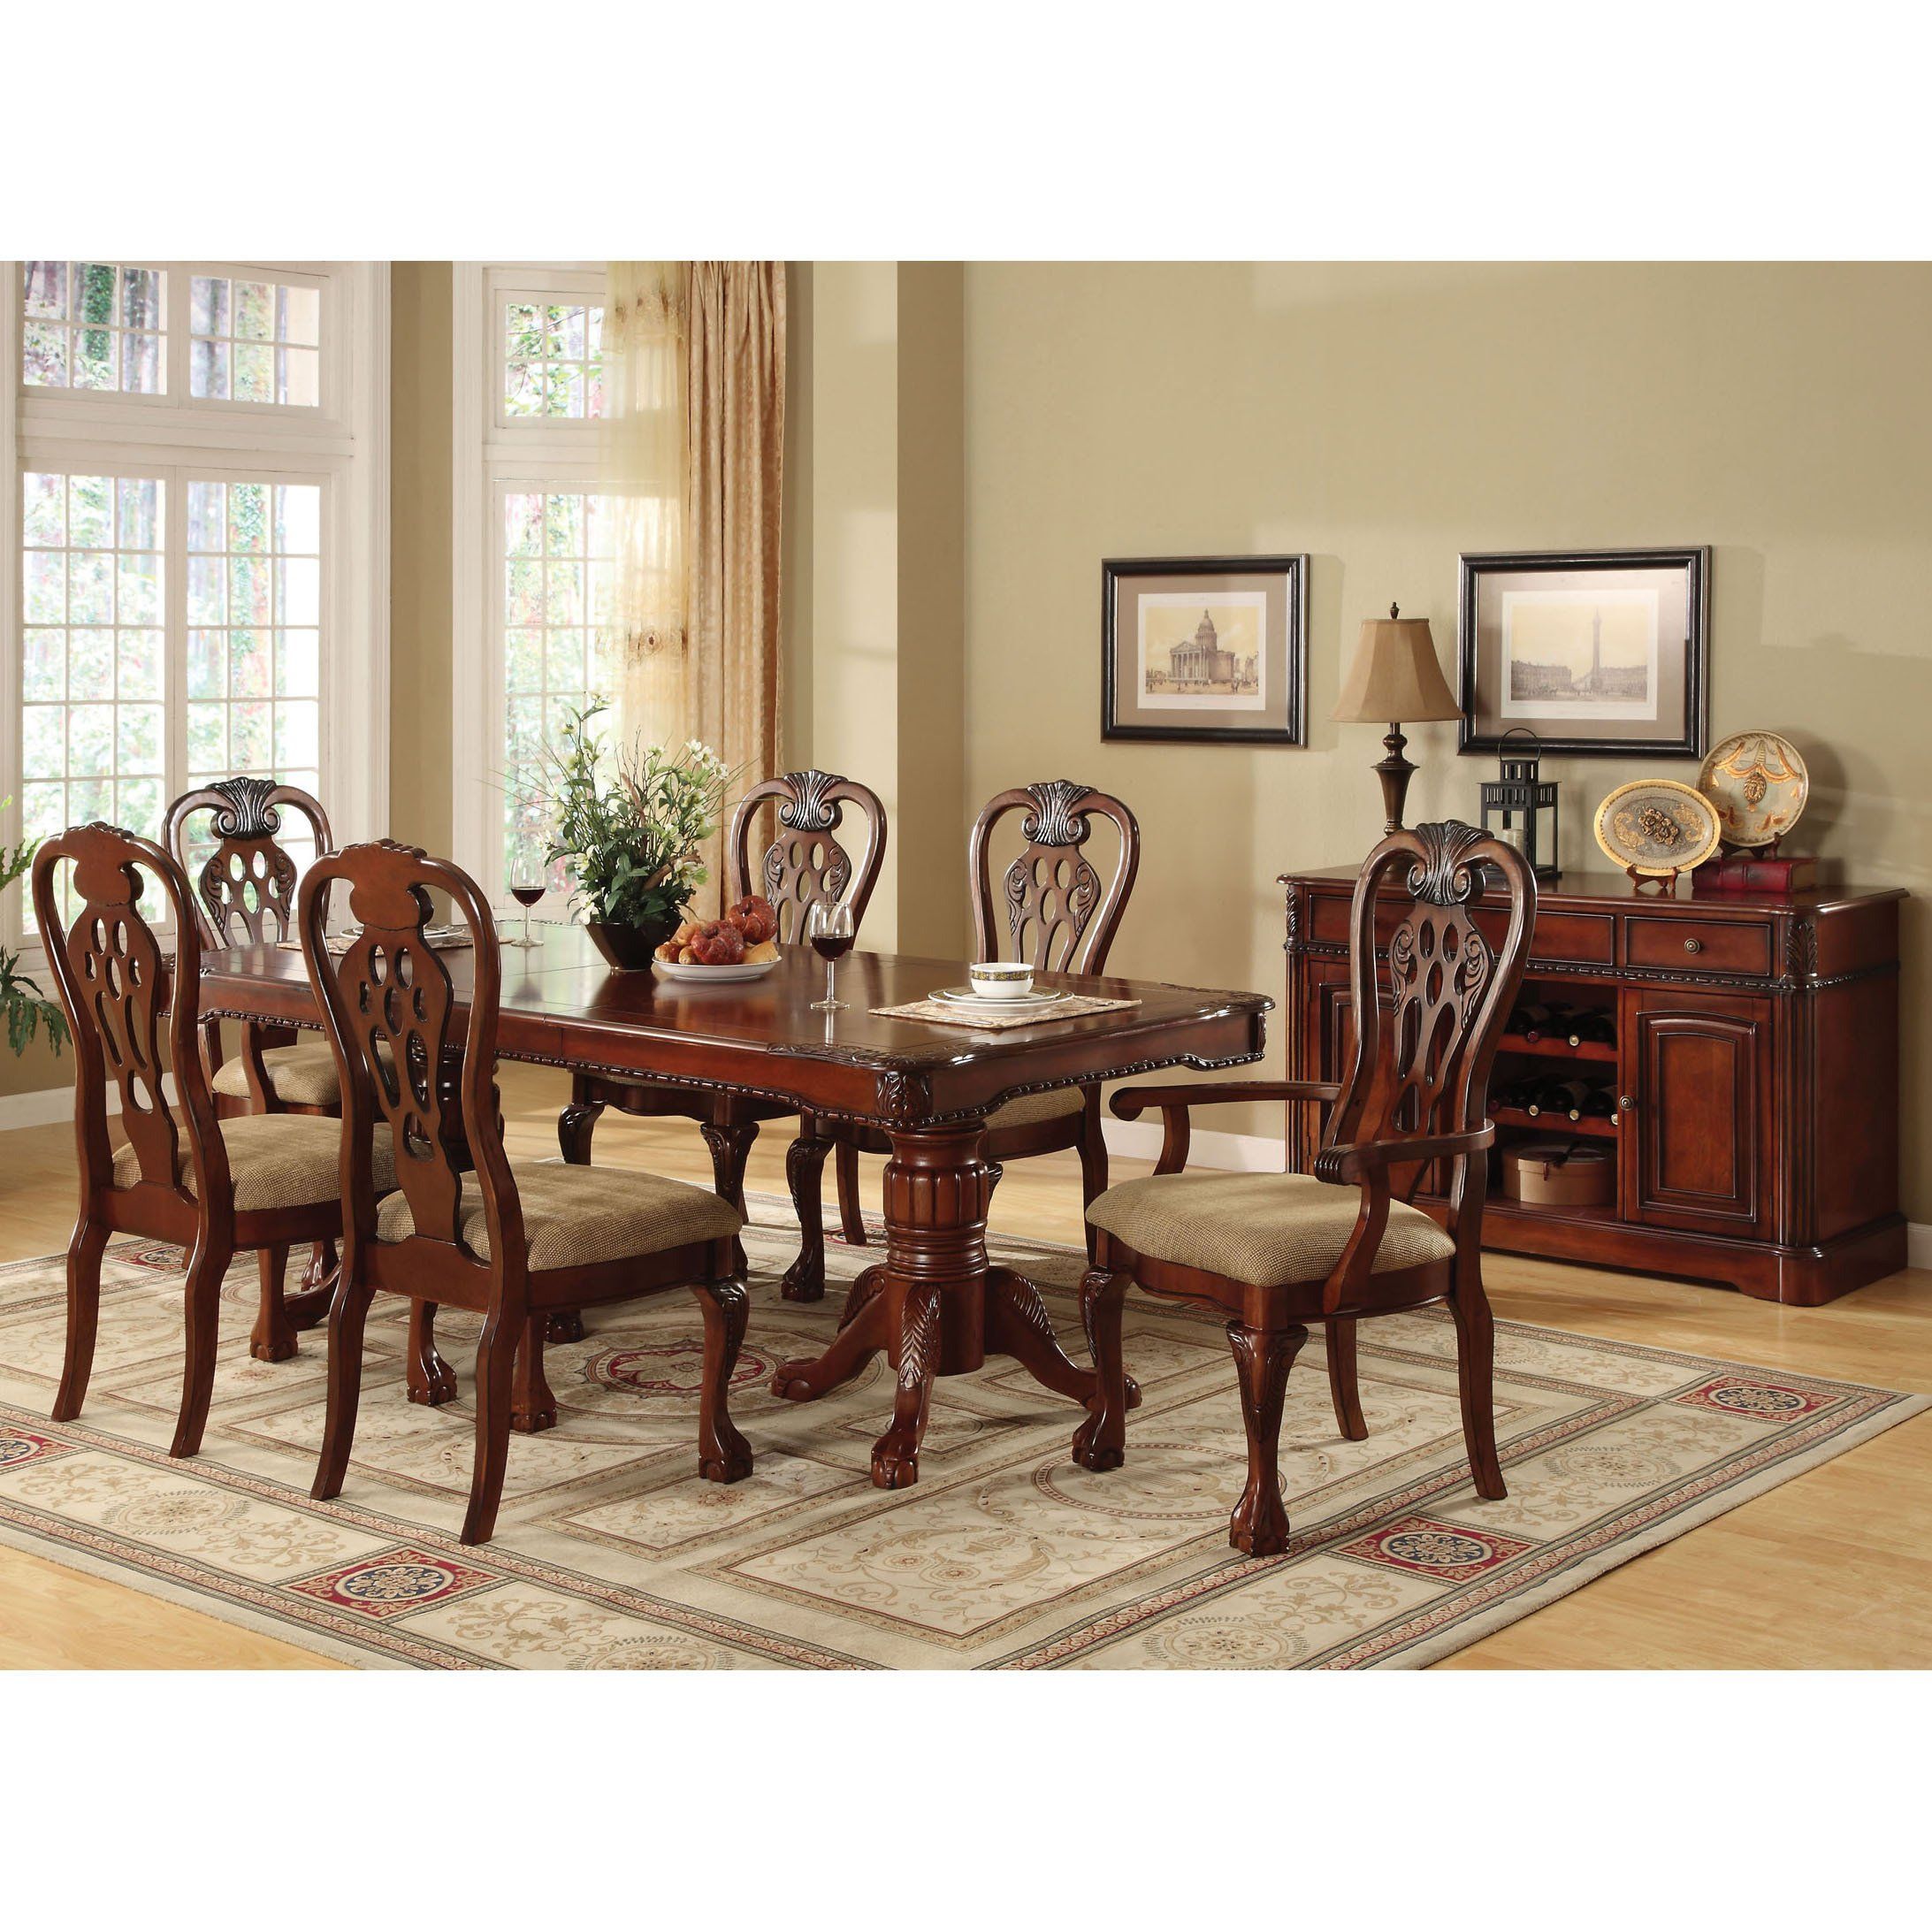 Shop Furniture Of America Harper 7 Piece Formal Cherry Dining Set Throughout Harper Down Oversized Sofa Chairs (View 21 of 25)